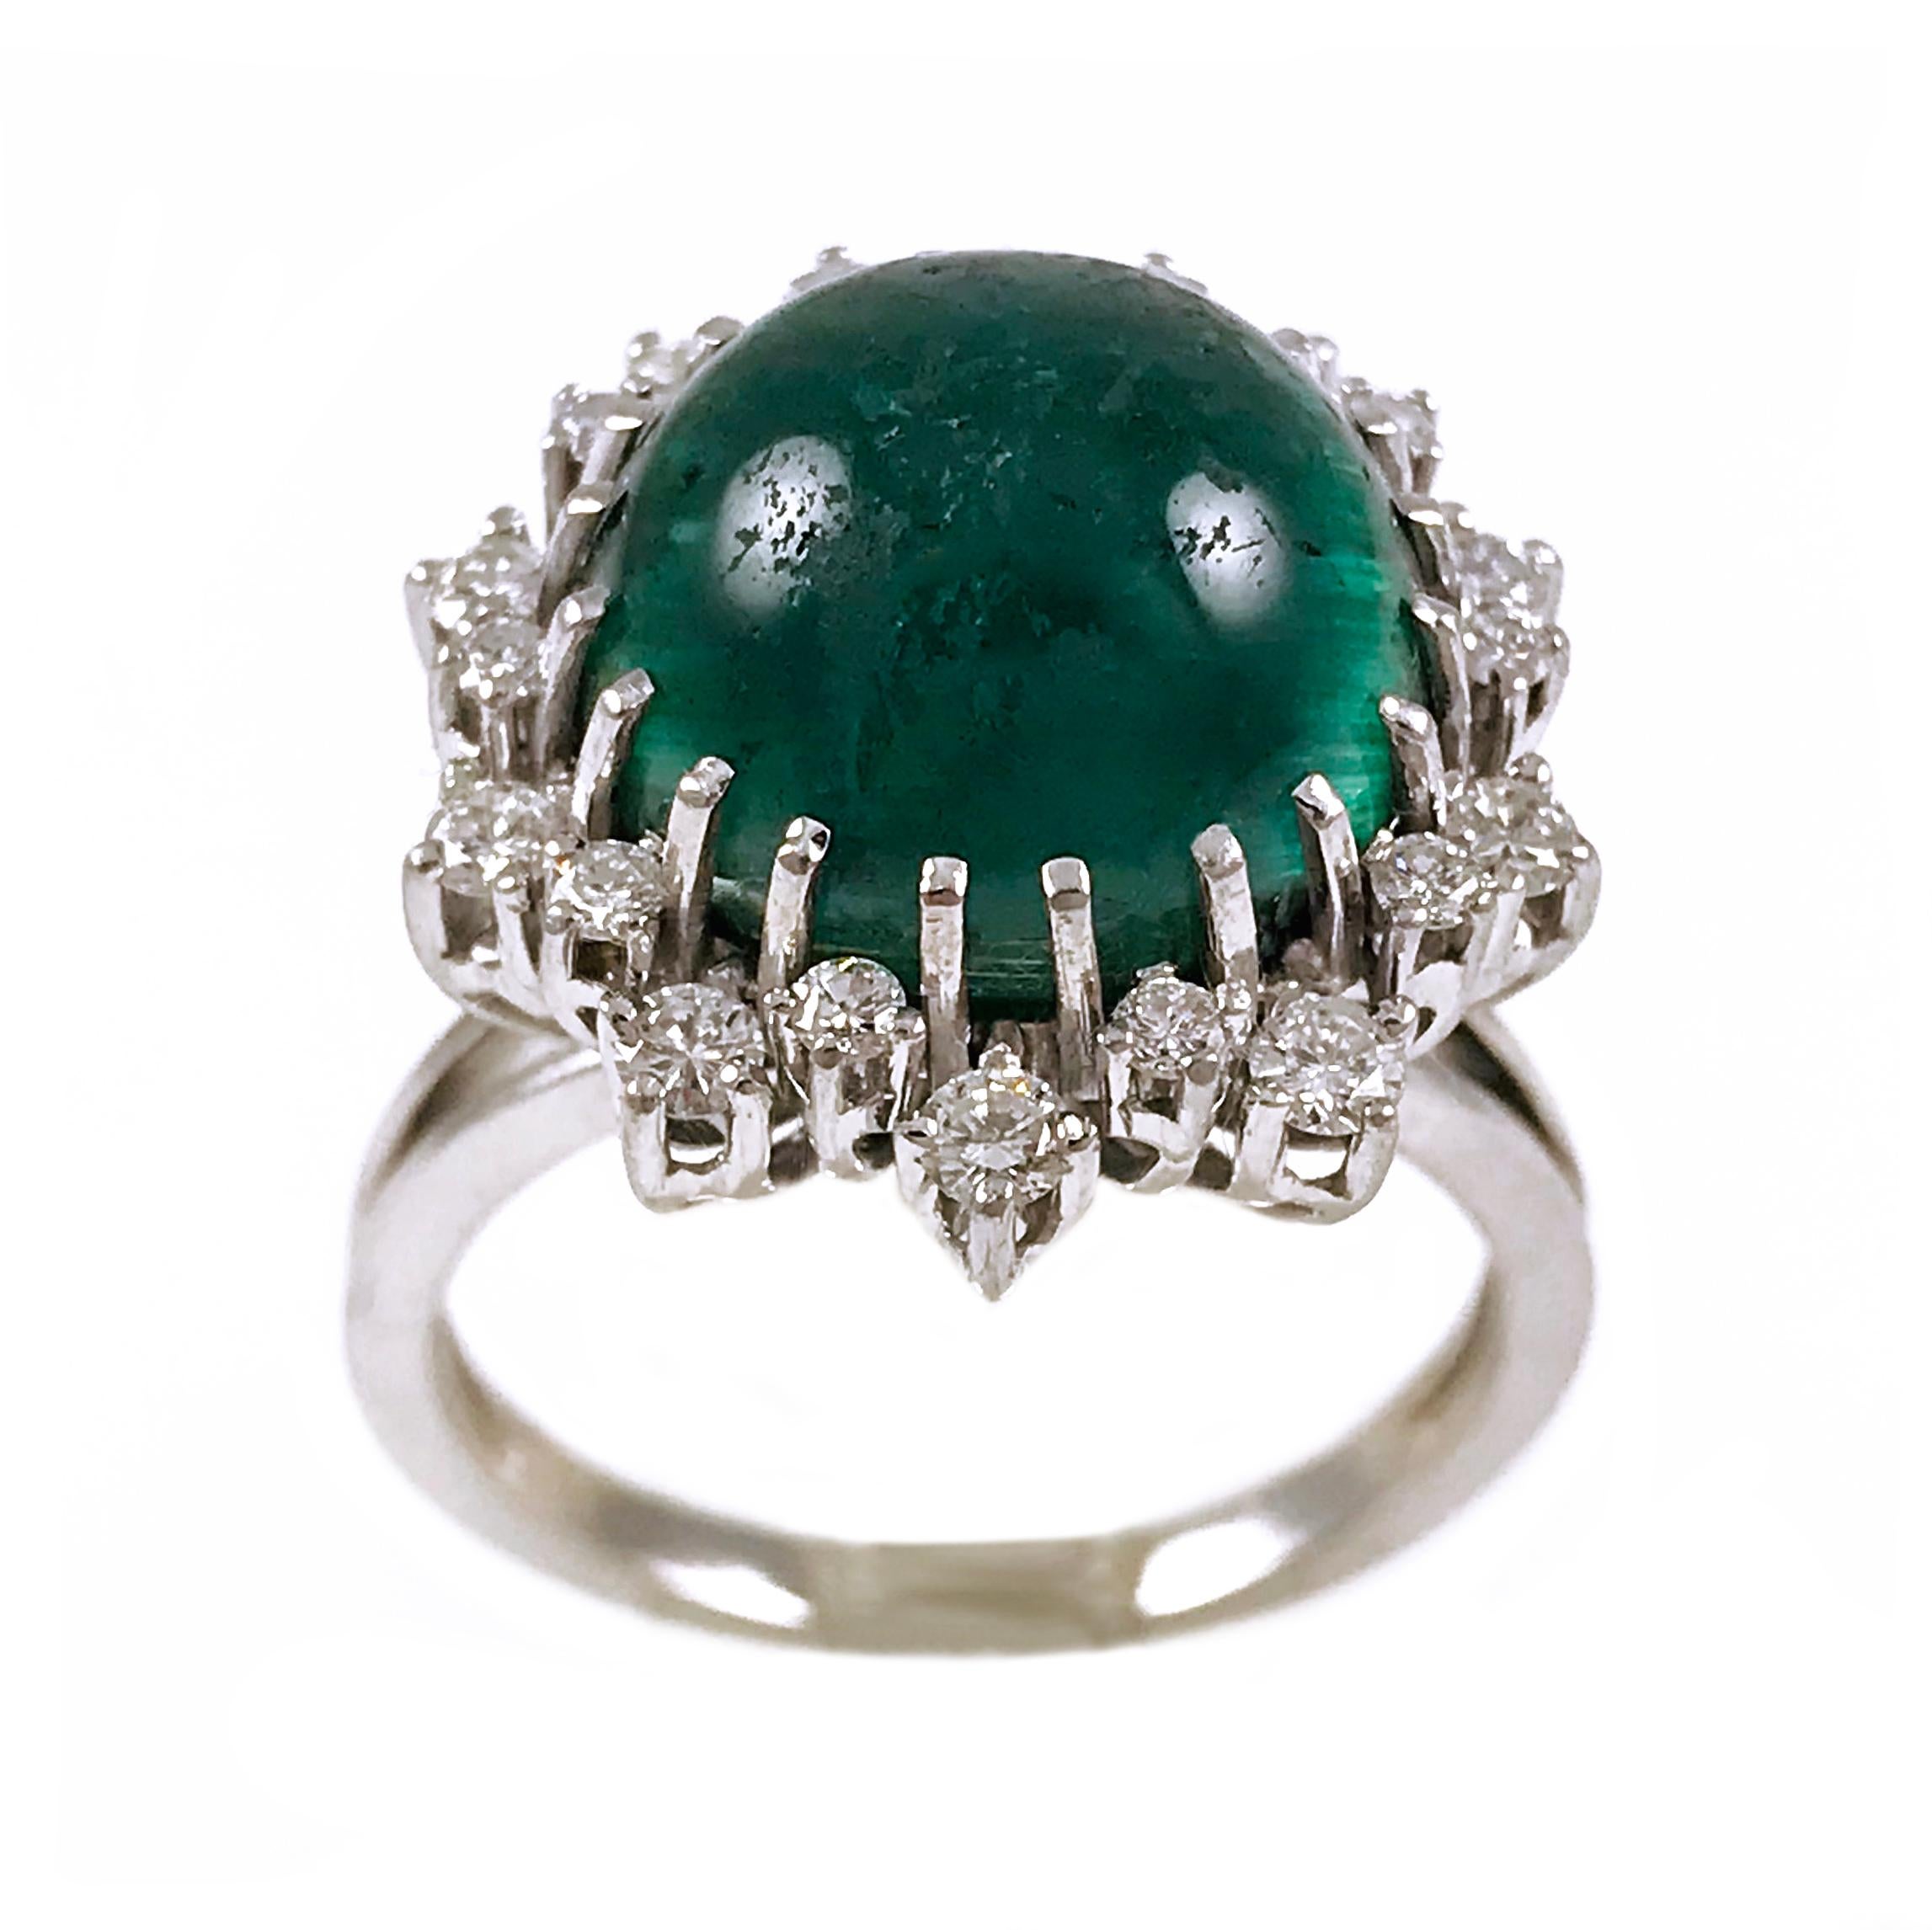 Round Cat’s Eye Green Tourmaline Diamond Cocktail Ring. Green Tourmaline is 14mm and has an approximate weight of 15.10ct. Intense beautiful green hue prong-set against 14k white gold. Prominent single band cat's eye when light hits the gemstone